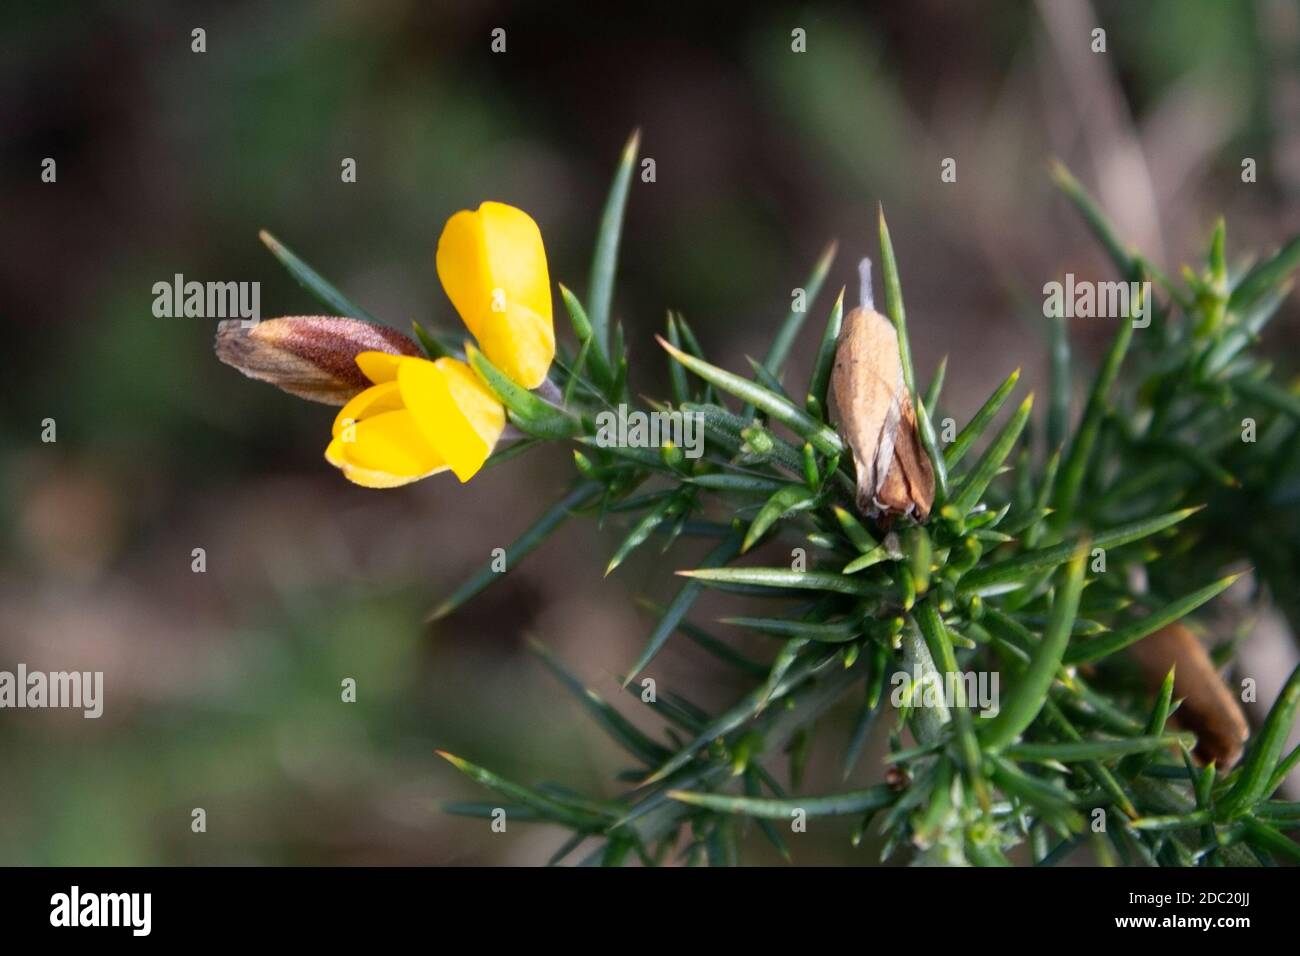 Close up of a yellow flower on a gorse bush with a blurred background Stock Photo